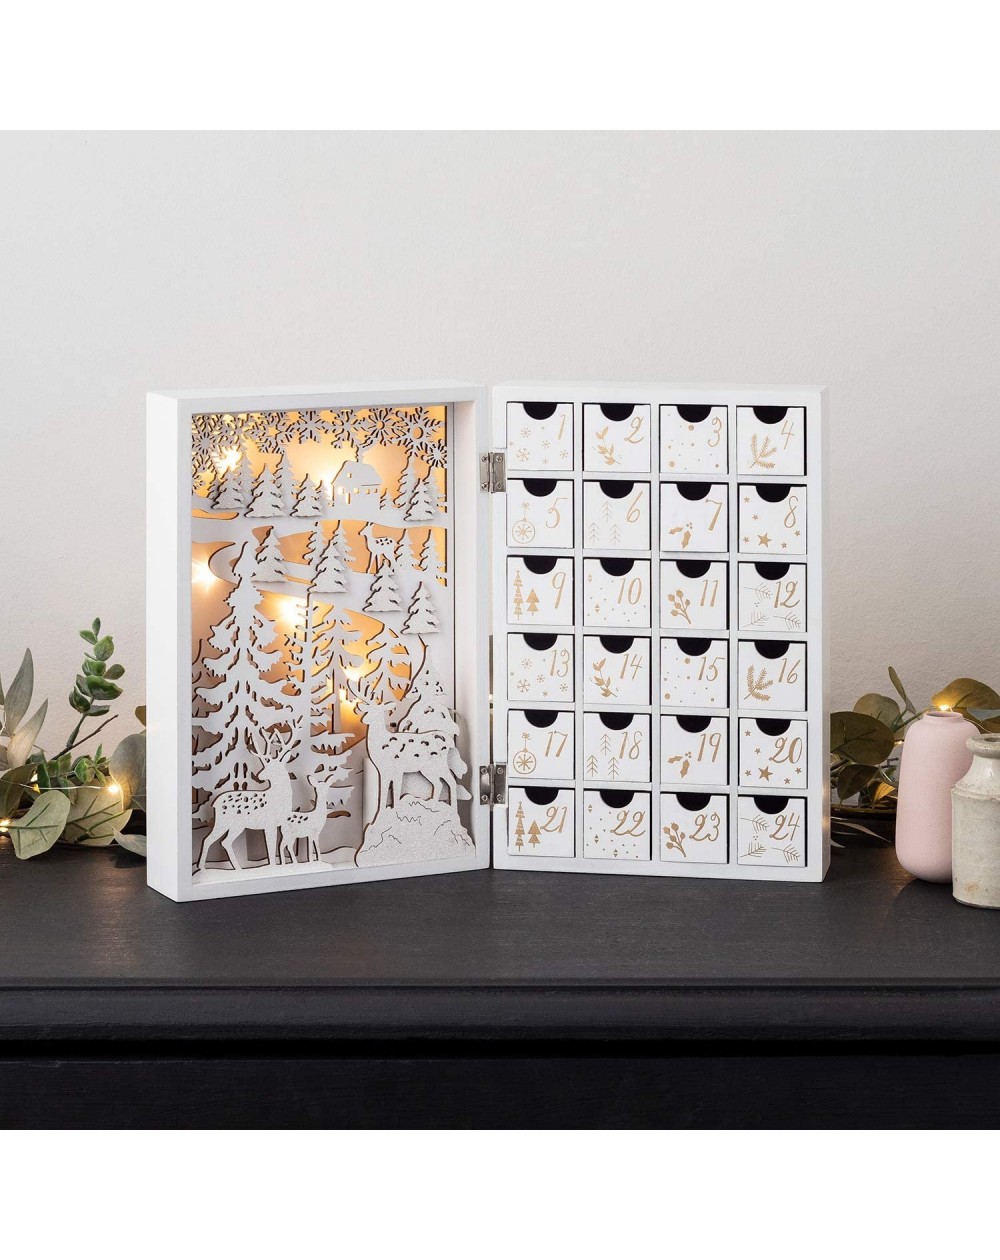 Advent Calendars Pre Lit Battery Operated LED Fold Out White Wooden Advent Calendar with Drawers - CM18T0HK6GN $33.79